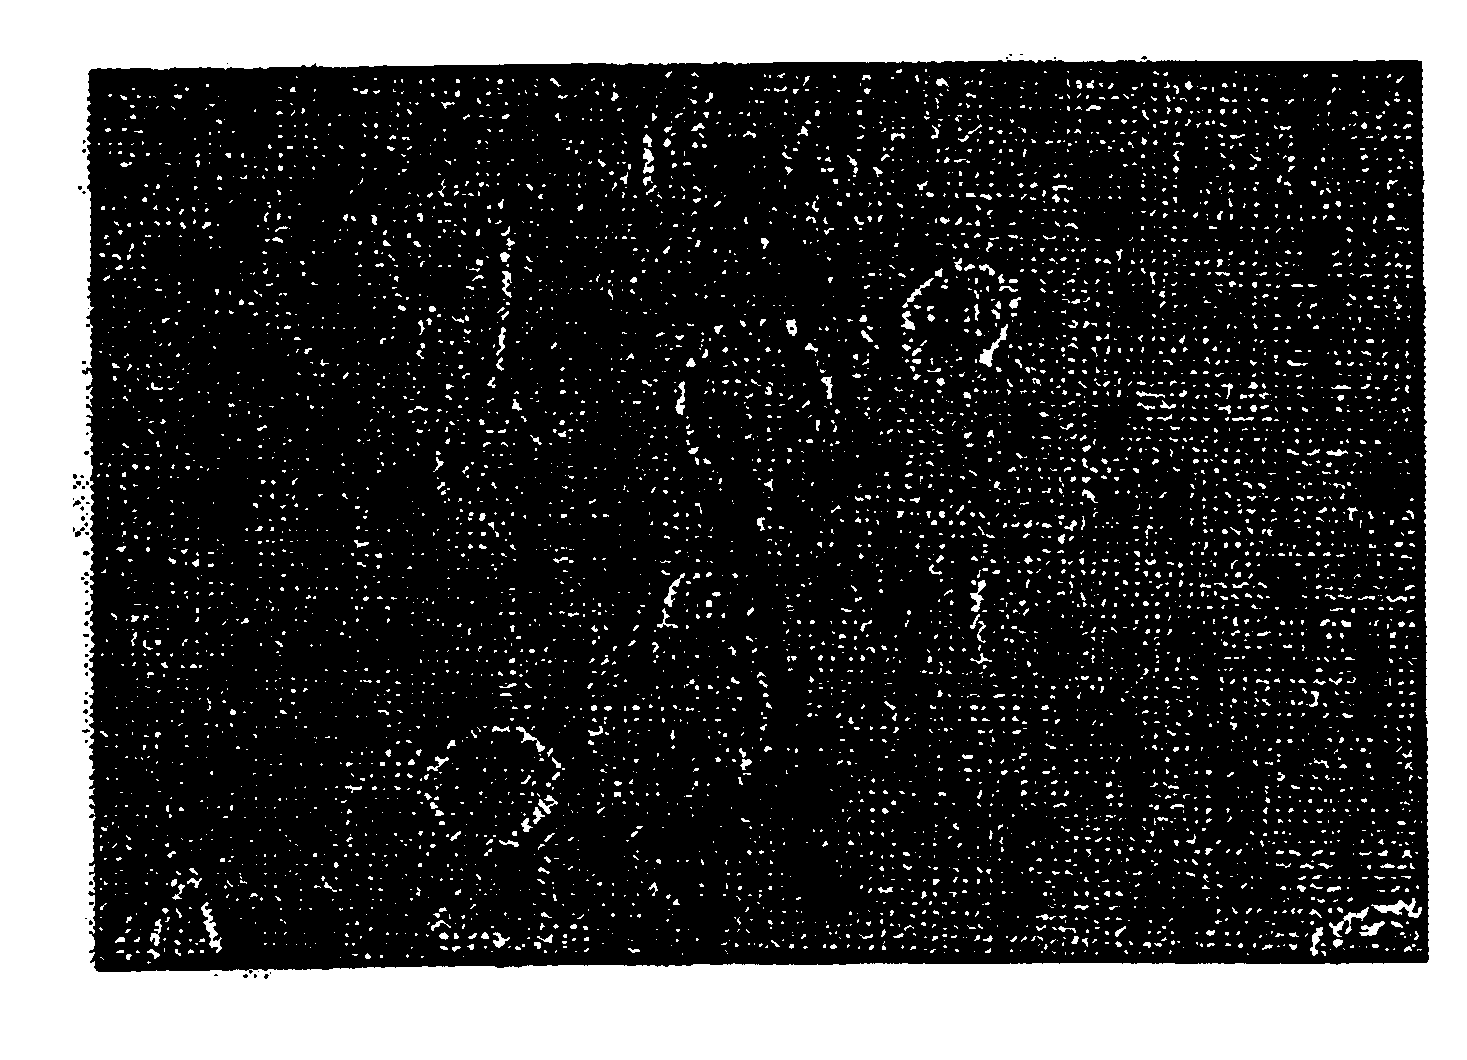 Pharmaceutical compositions comprising cyclic glycerophosphates and analogs thereof for promoting neural cell differentiation